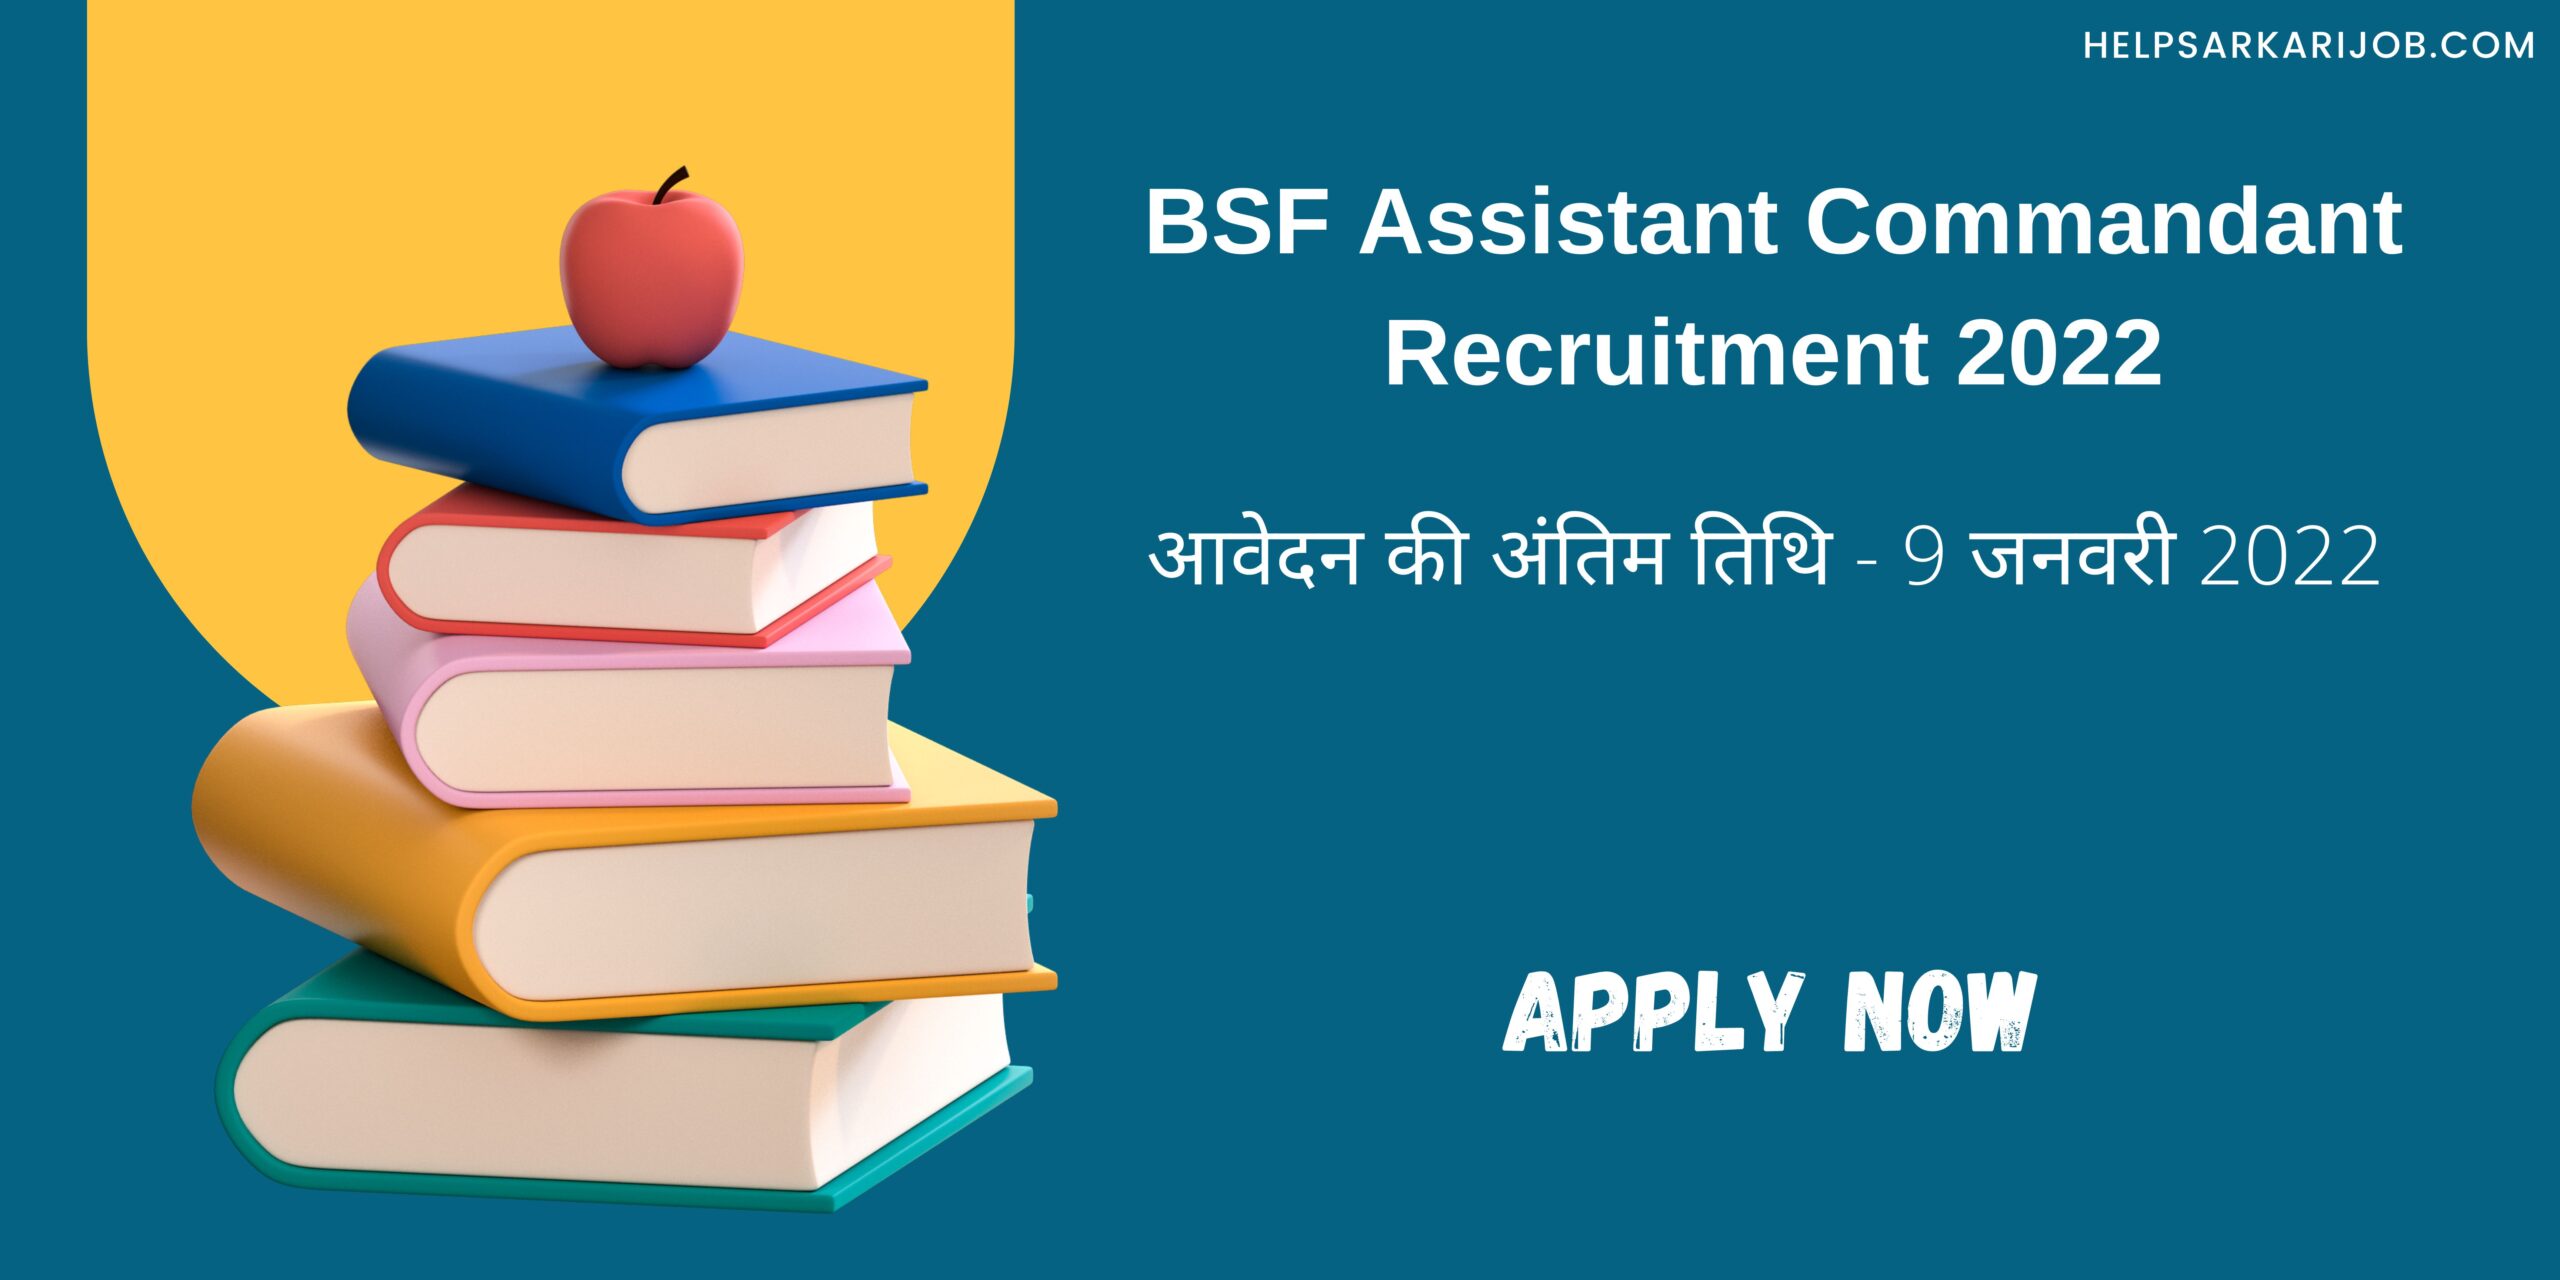 BSF Assistant Commandant Recruitment 2022 last date to apply